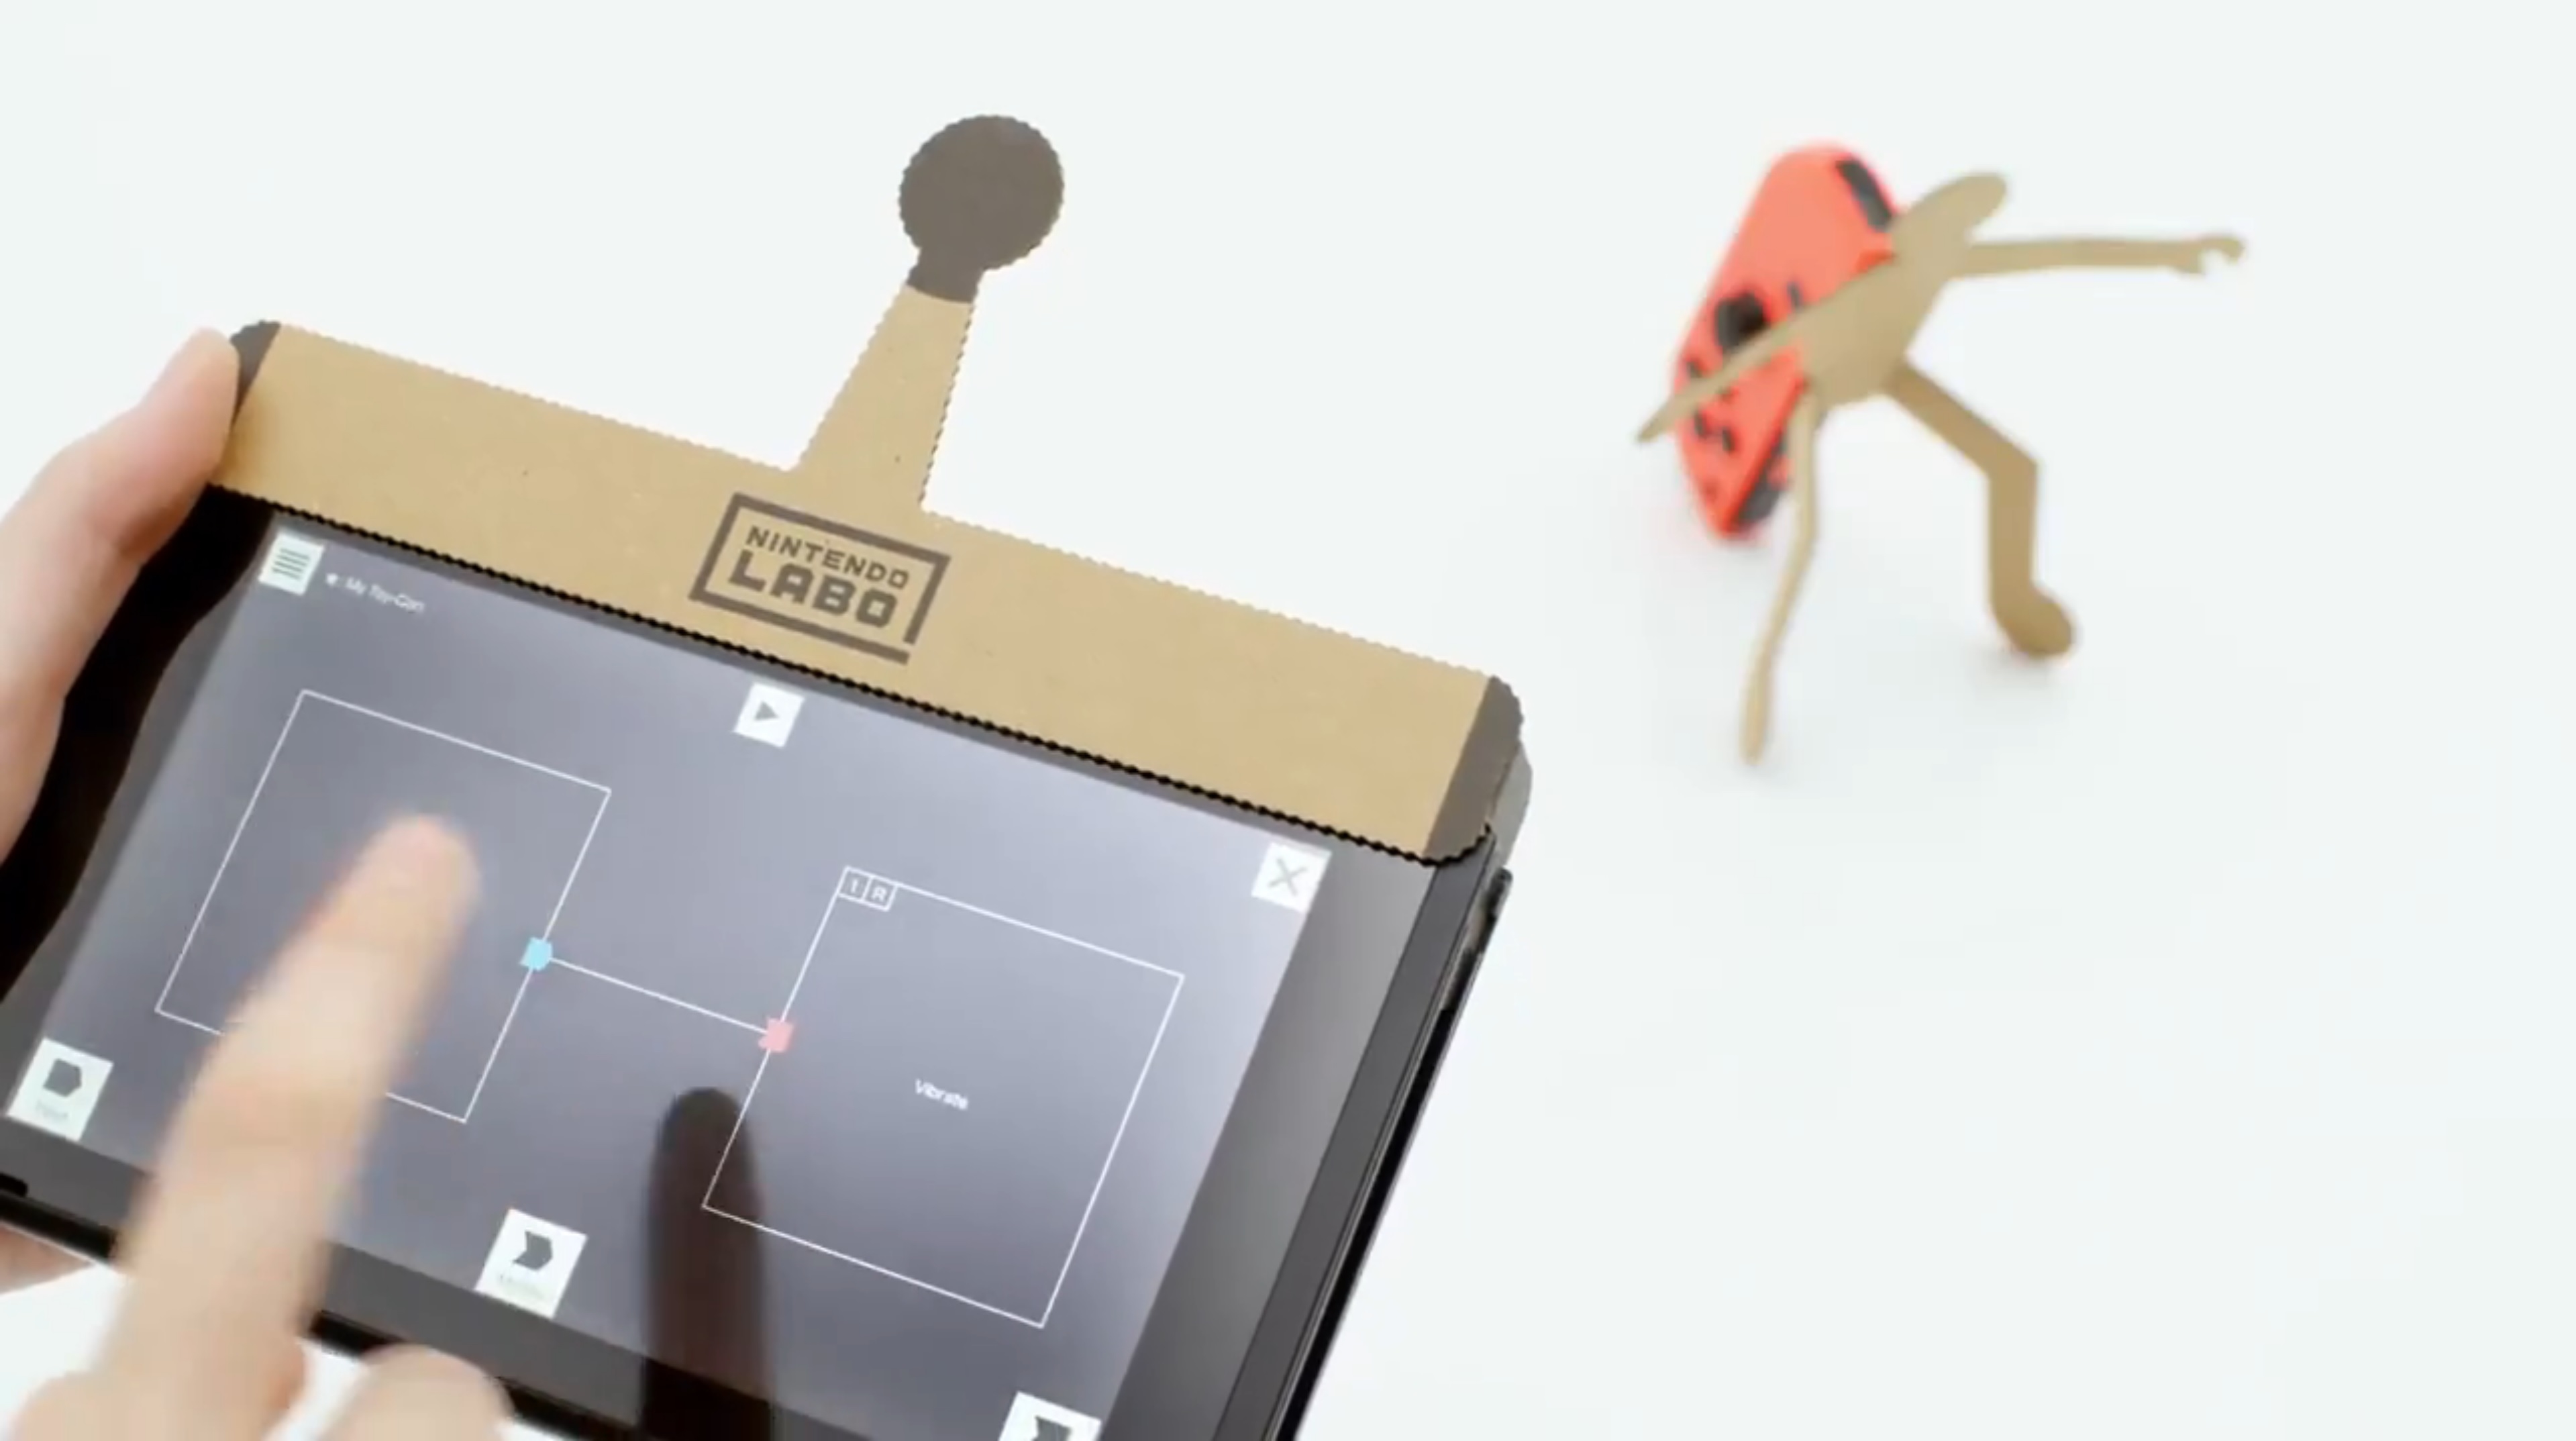 Nintendo Labo gadgets can be remixed with 'Toy-Con Garage' | DeviceDaily.com